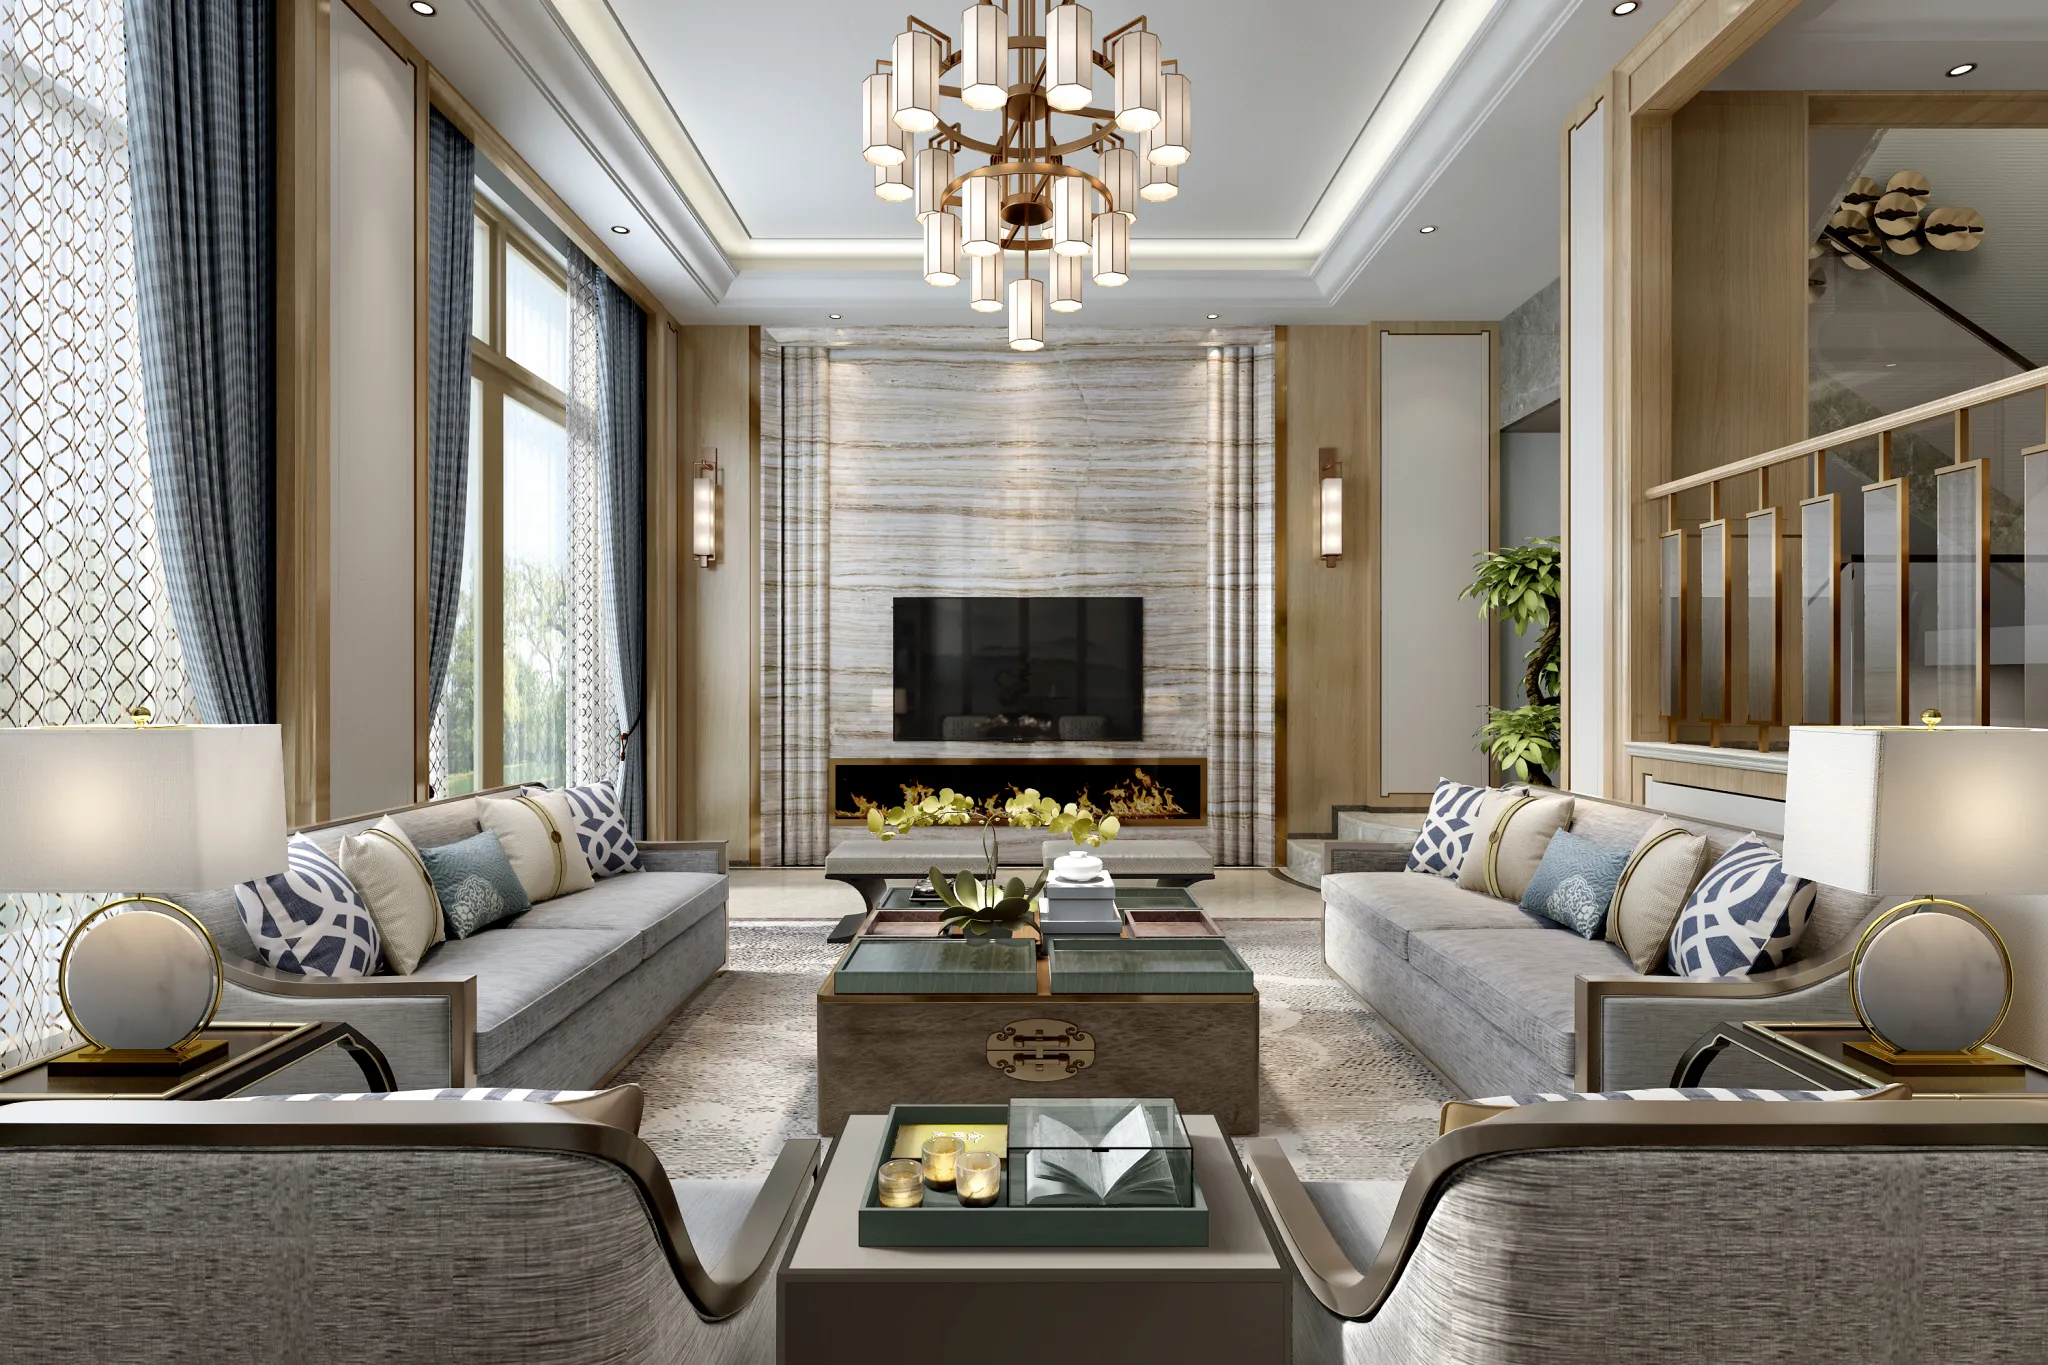 DESMOD INTERIOR 2021 (VRAY) – 4. LIVING ROOM – CHINESE – 005